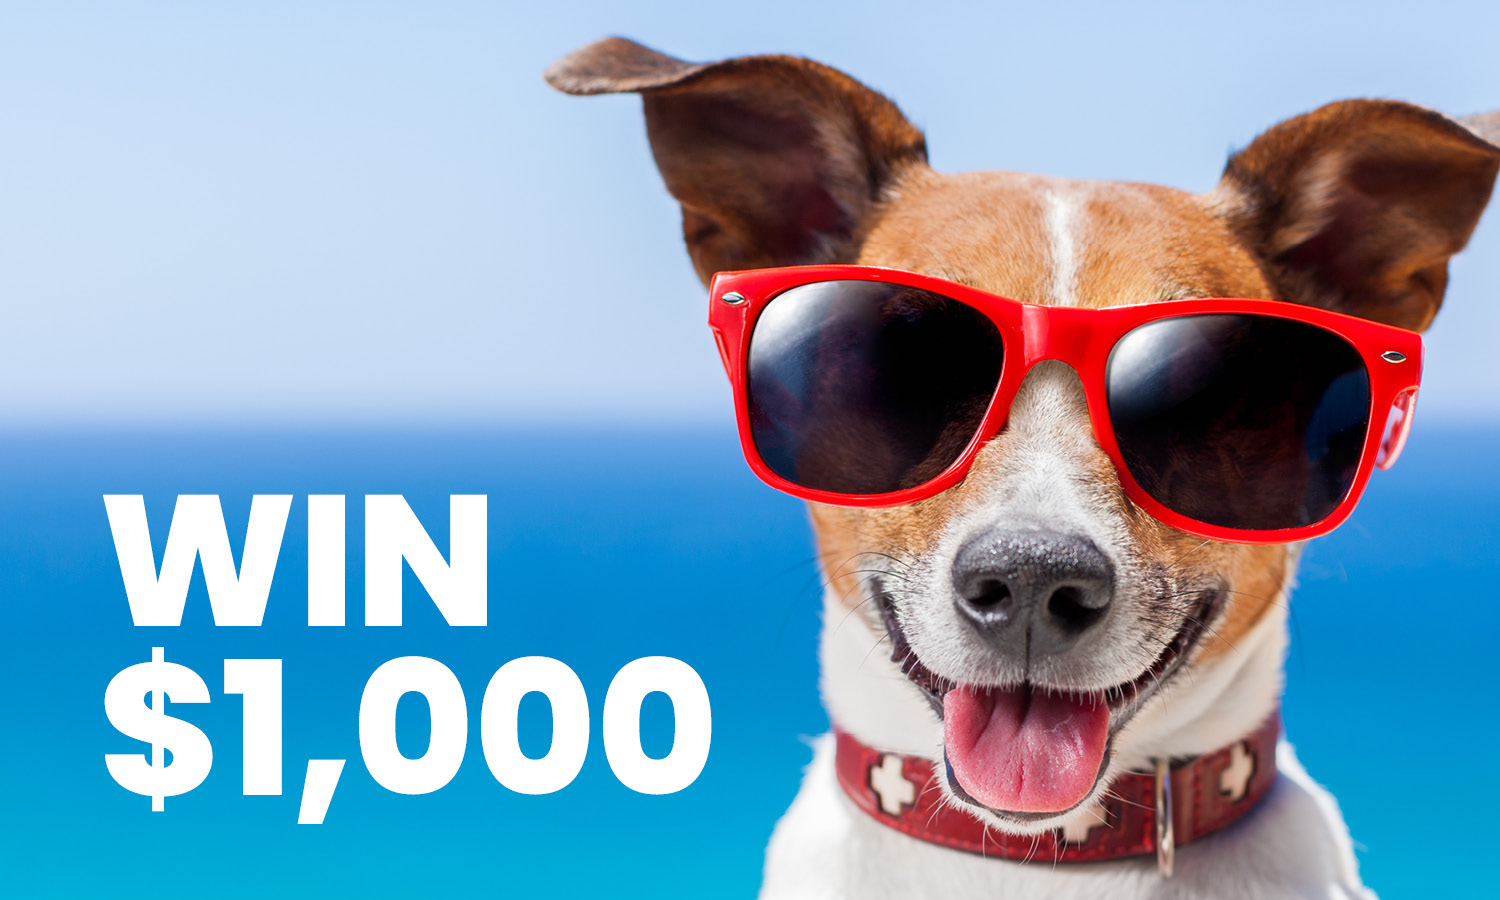 Brown and white dog wearing red sunglasses. Blue skies and water in the background. Text: Win $1,000